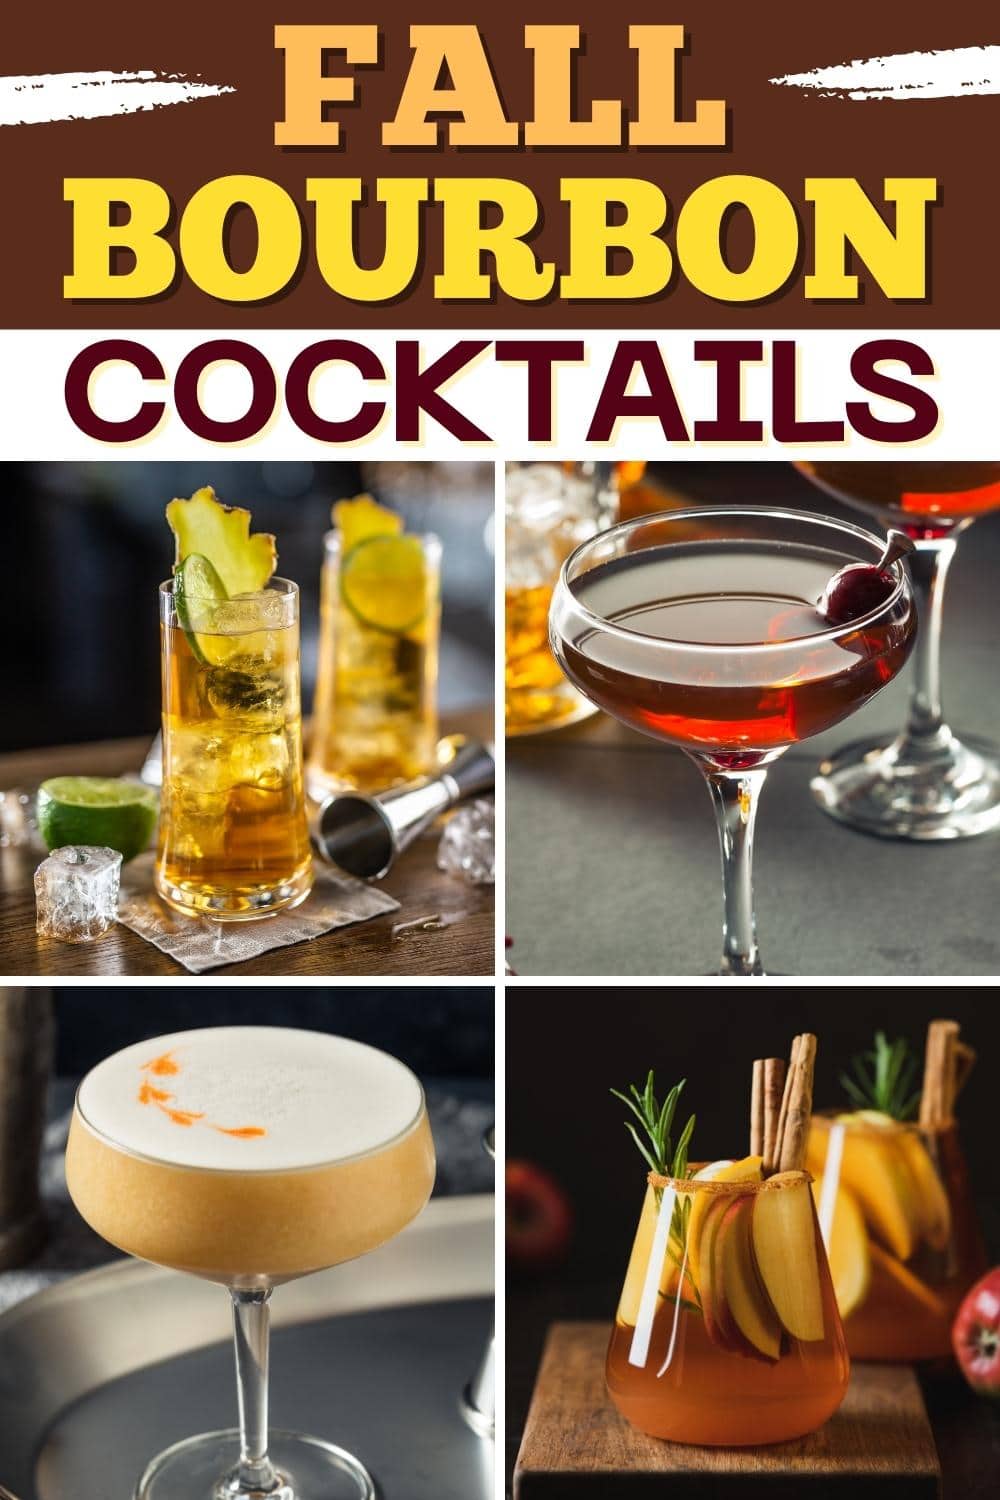 20 Best Fall Bourbon Cocktails (+ Easy Recipes) Food and Recipes